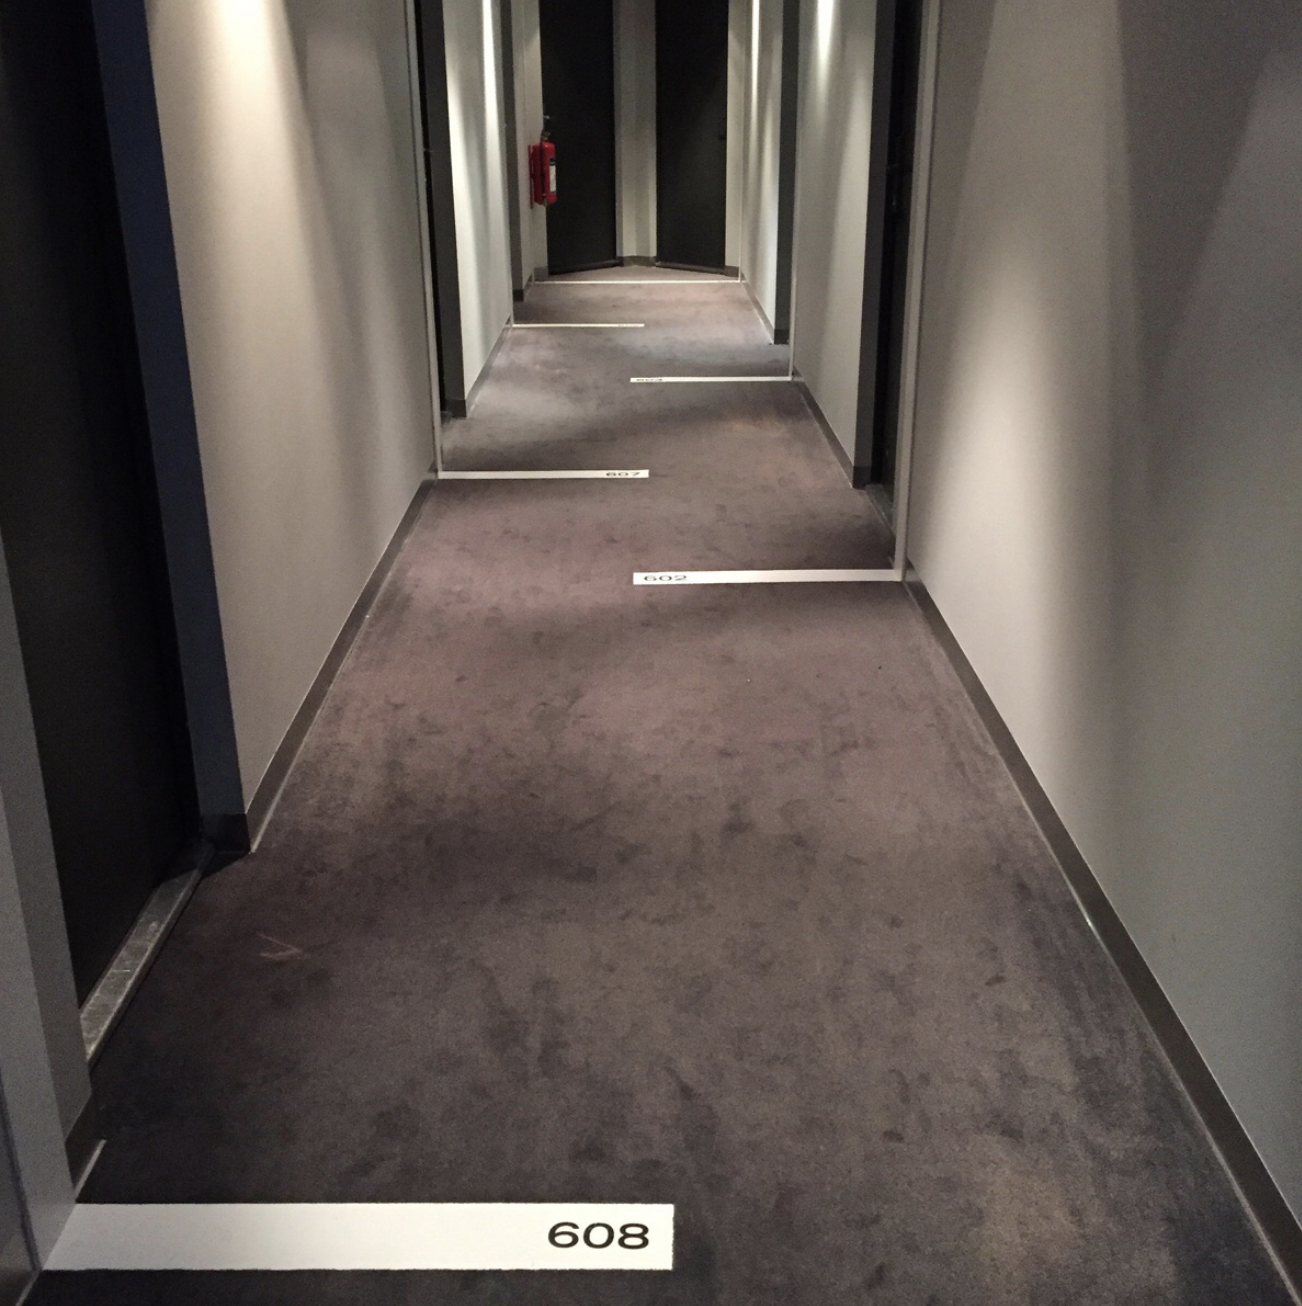 Narrow hotel hallway with room numbers visible, leading toward a distant exit sign